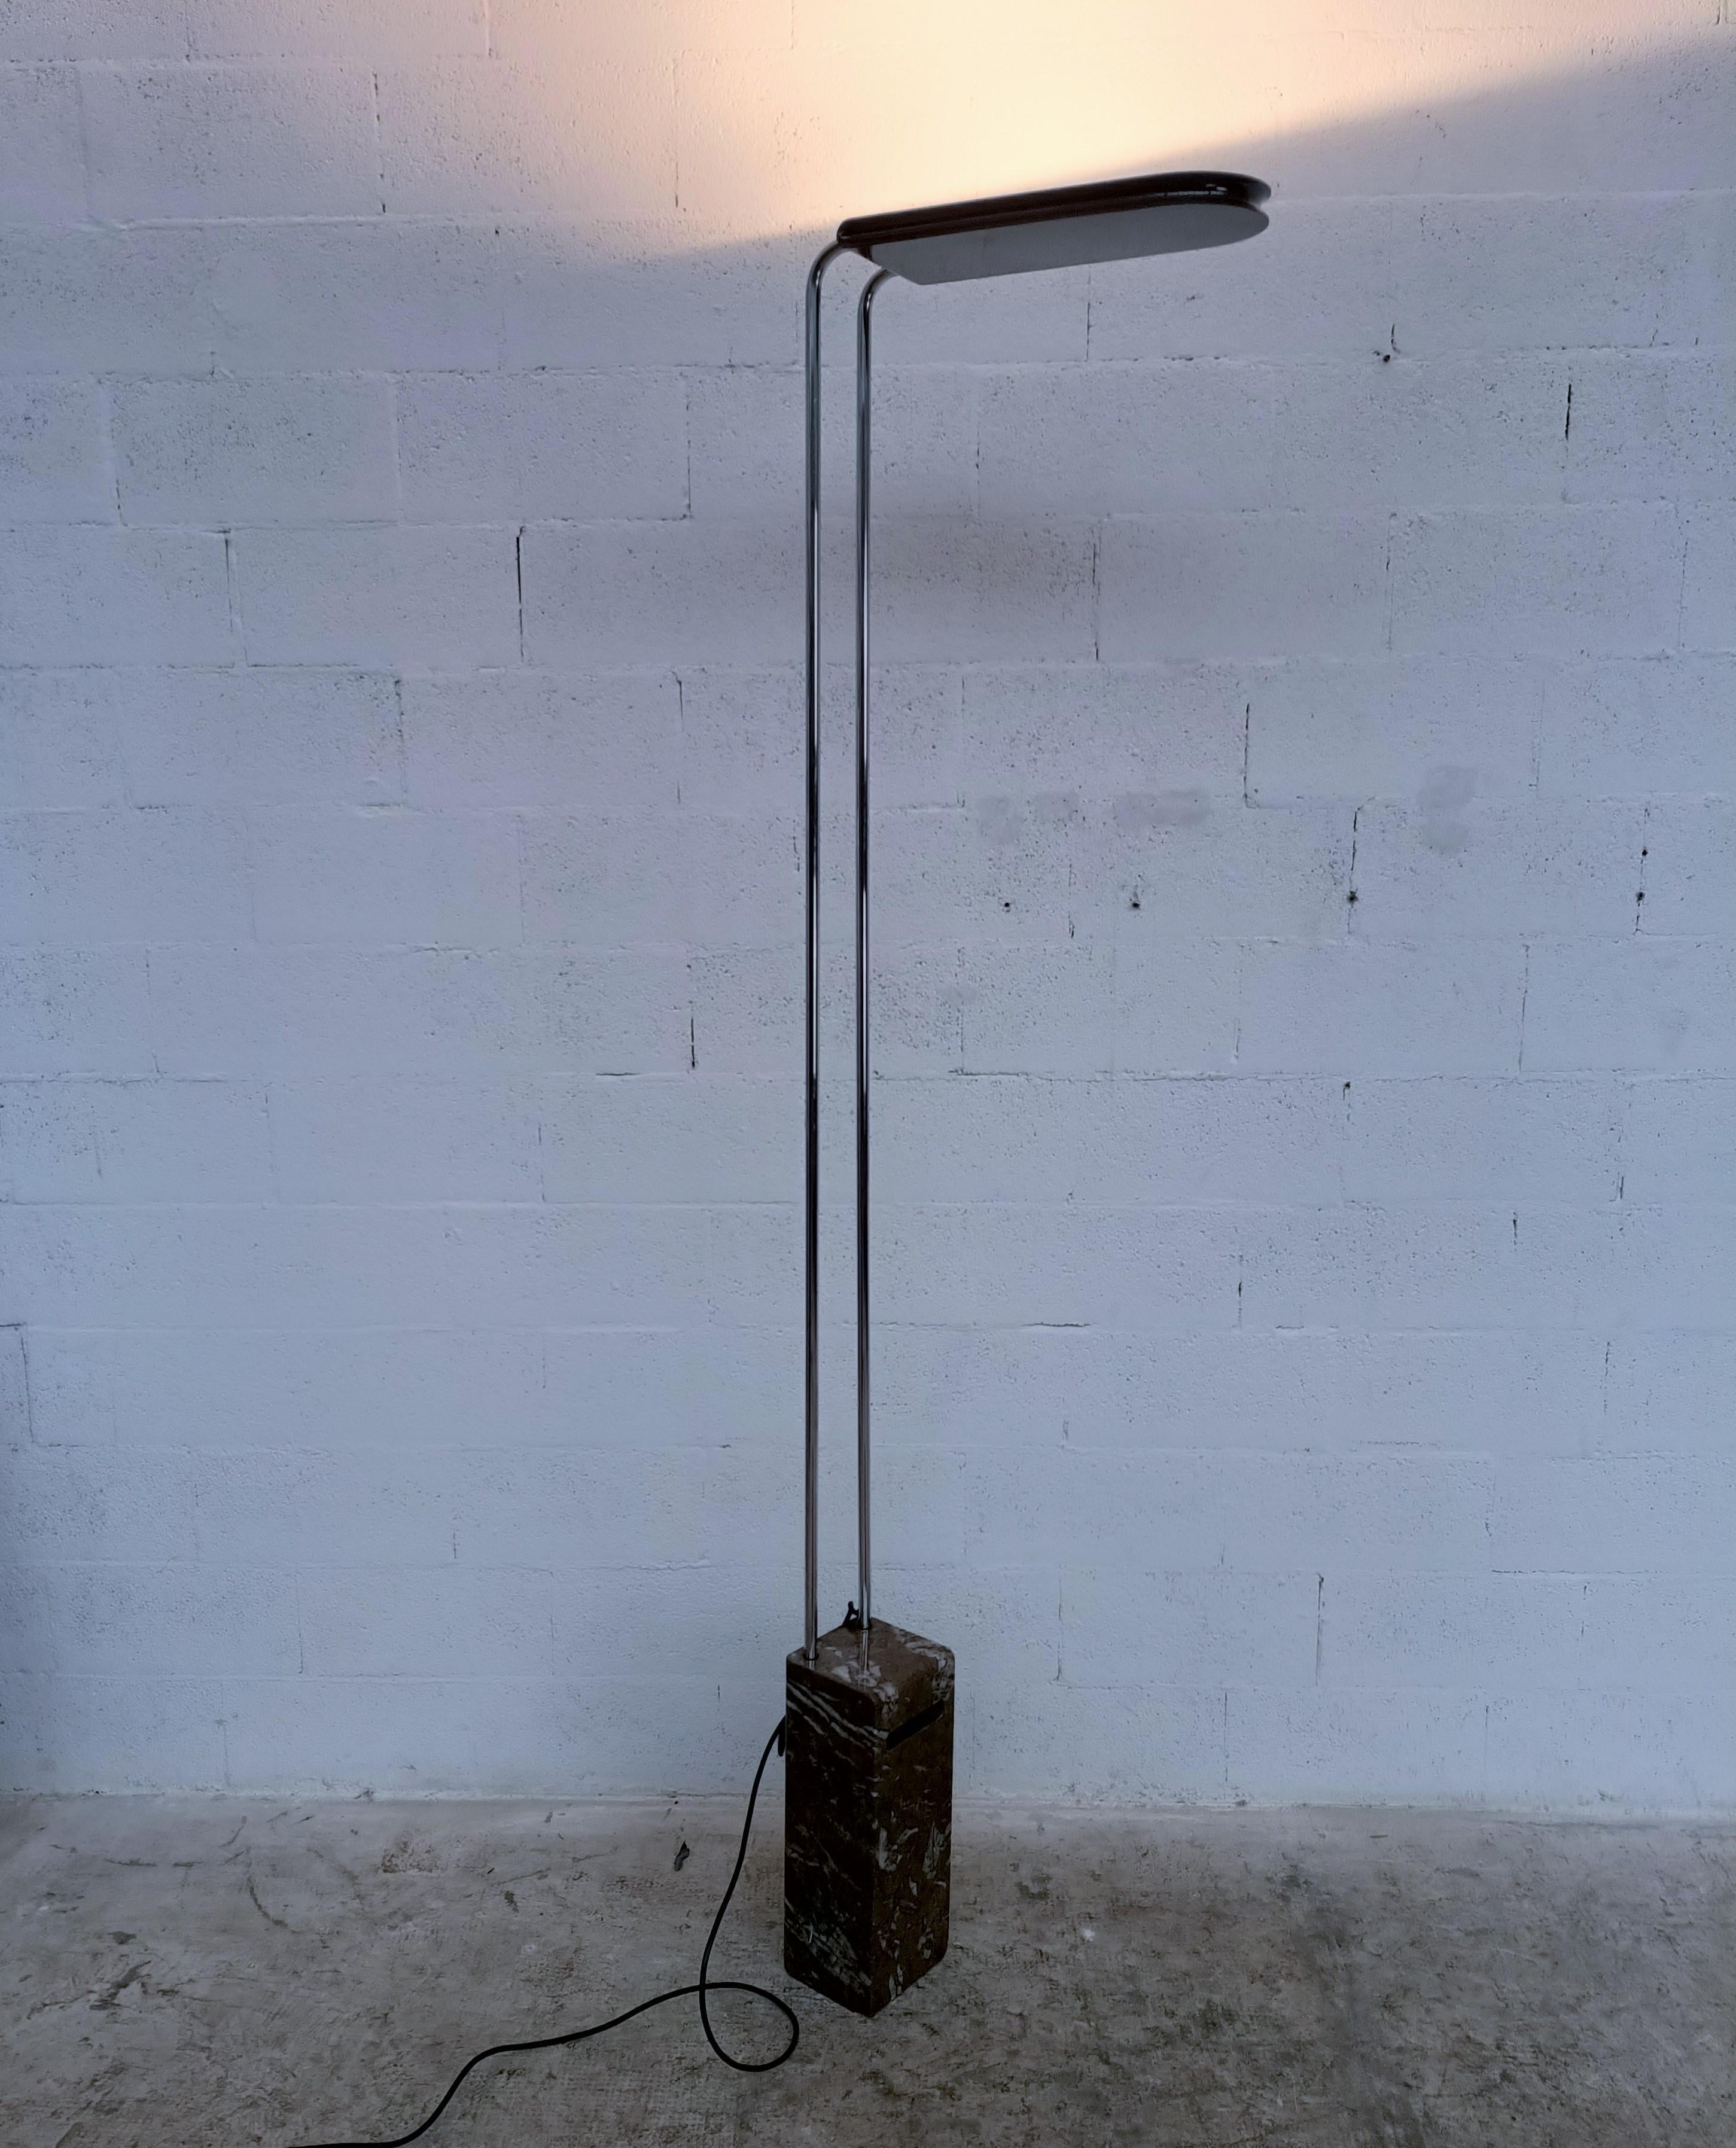 Gesto halogen floor lamp with marble base designed by Bruno Gecchelin and produced by Skipper 1970s.
It features a white marble base, black hood and chromed tubular body. Included is a dimmer that regulates the upward light beam, thus providing an